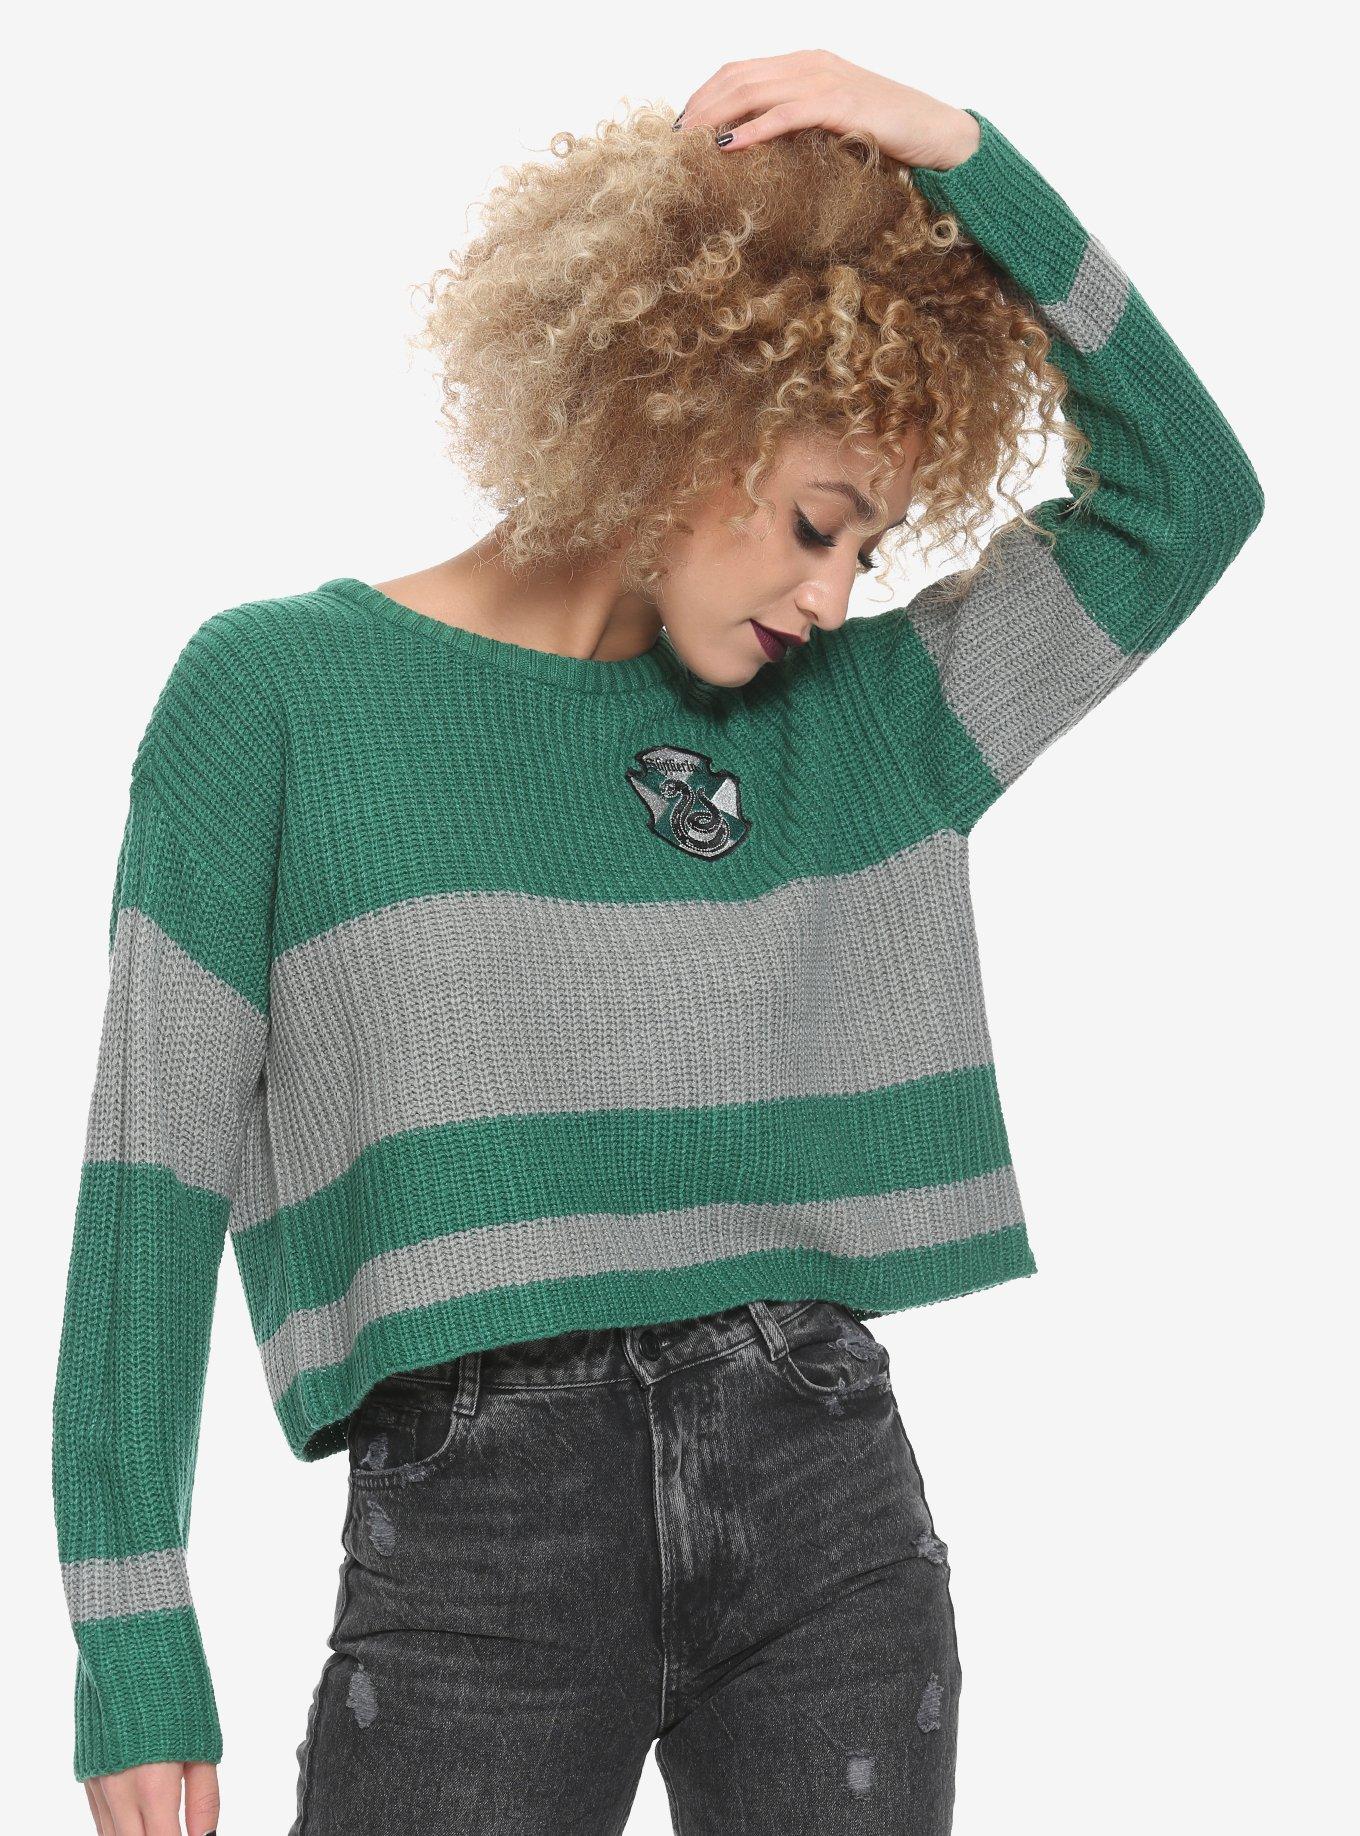 Potter Slytherin Girls Sweater | Hot Topic